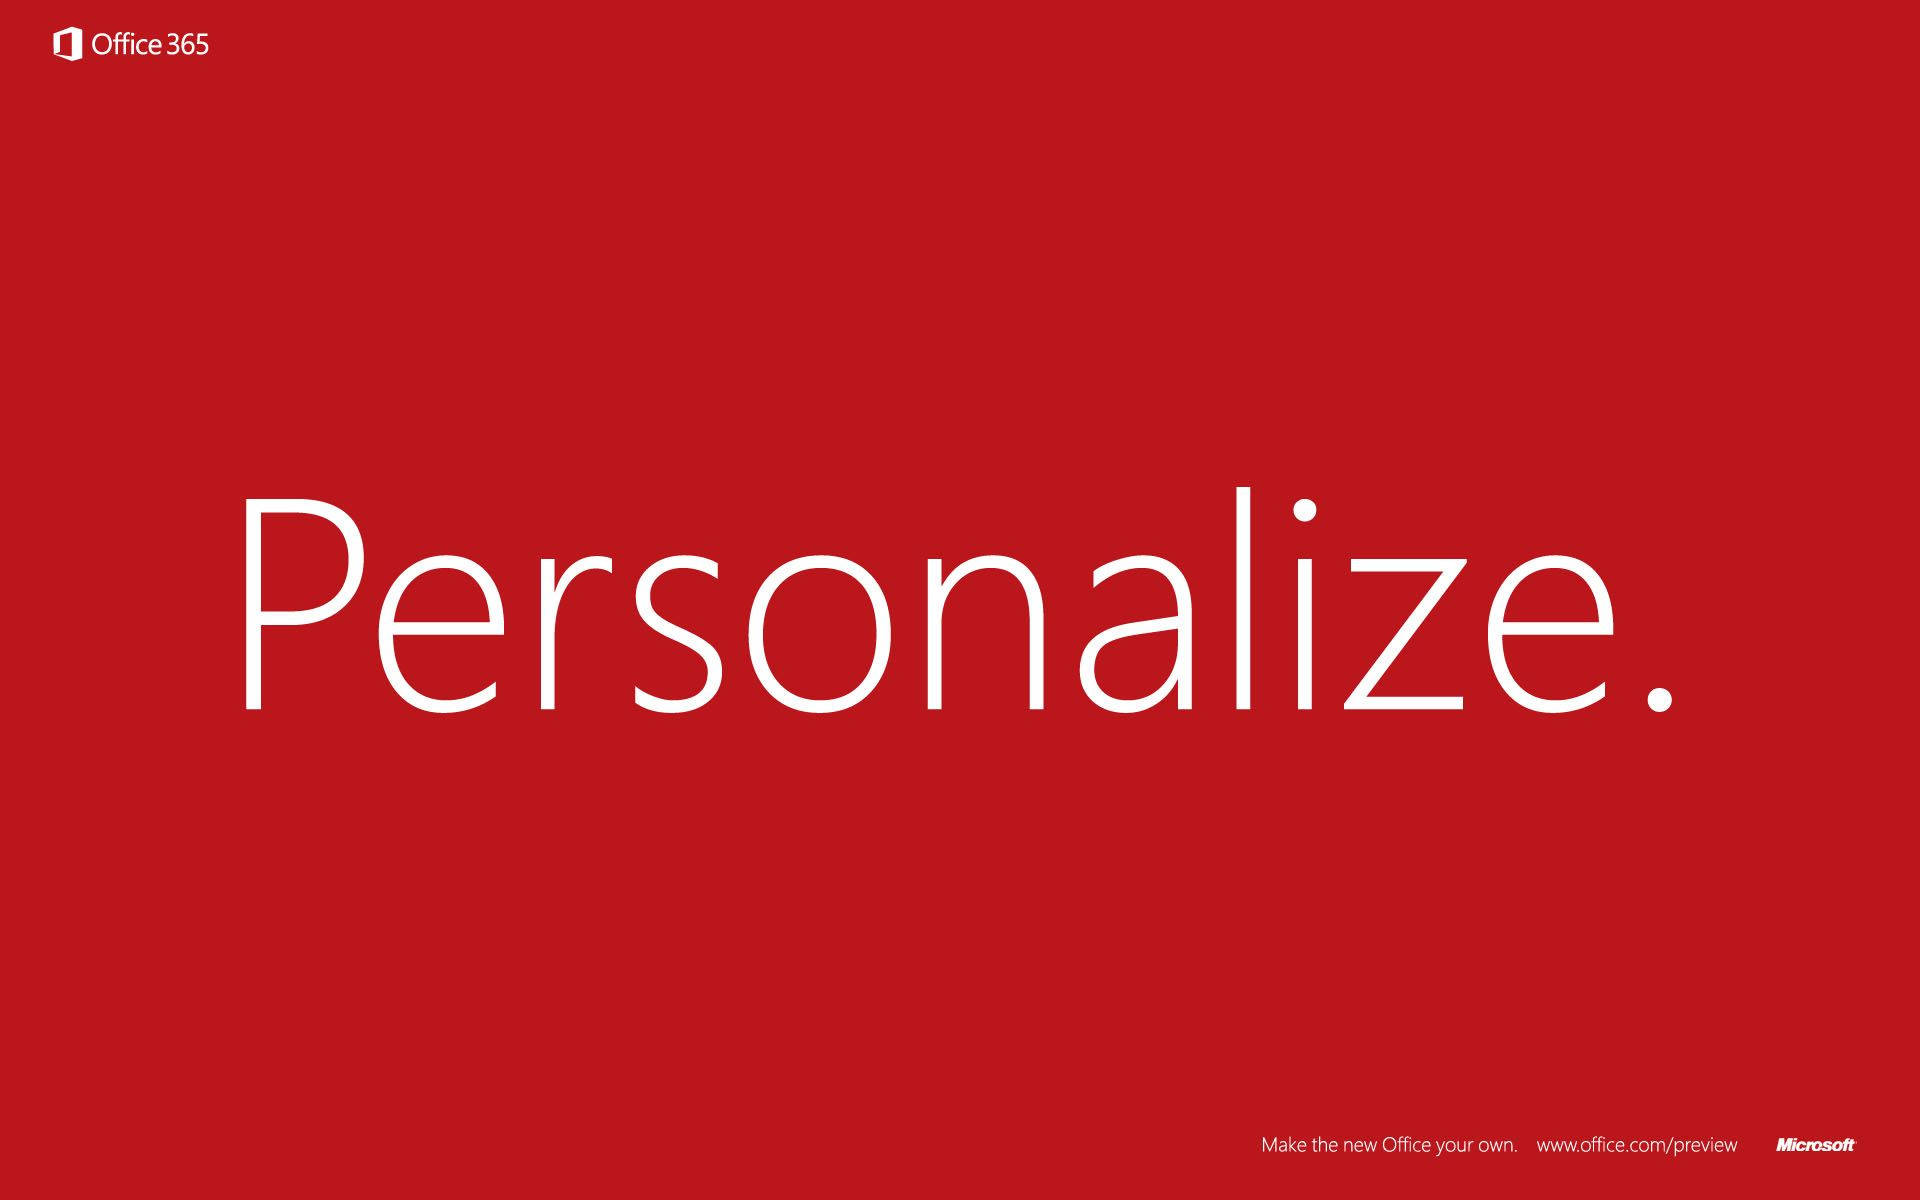 Personalize Office 365 Wallpaper